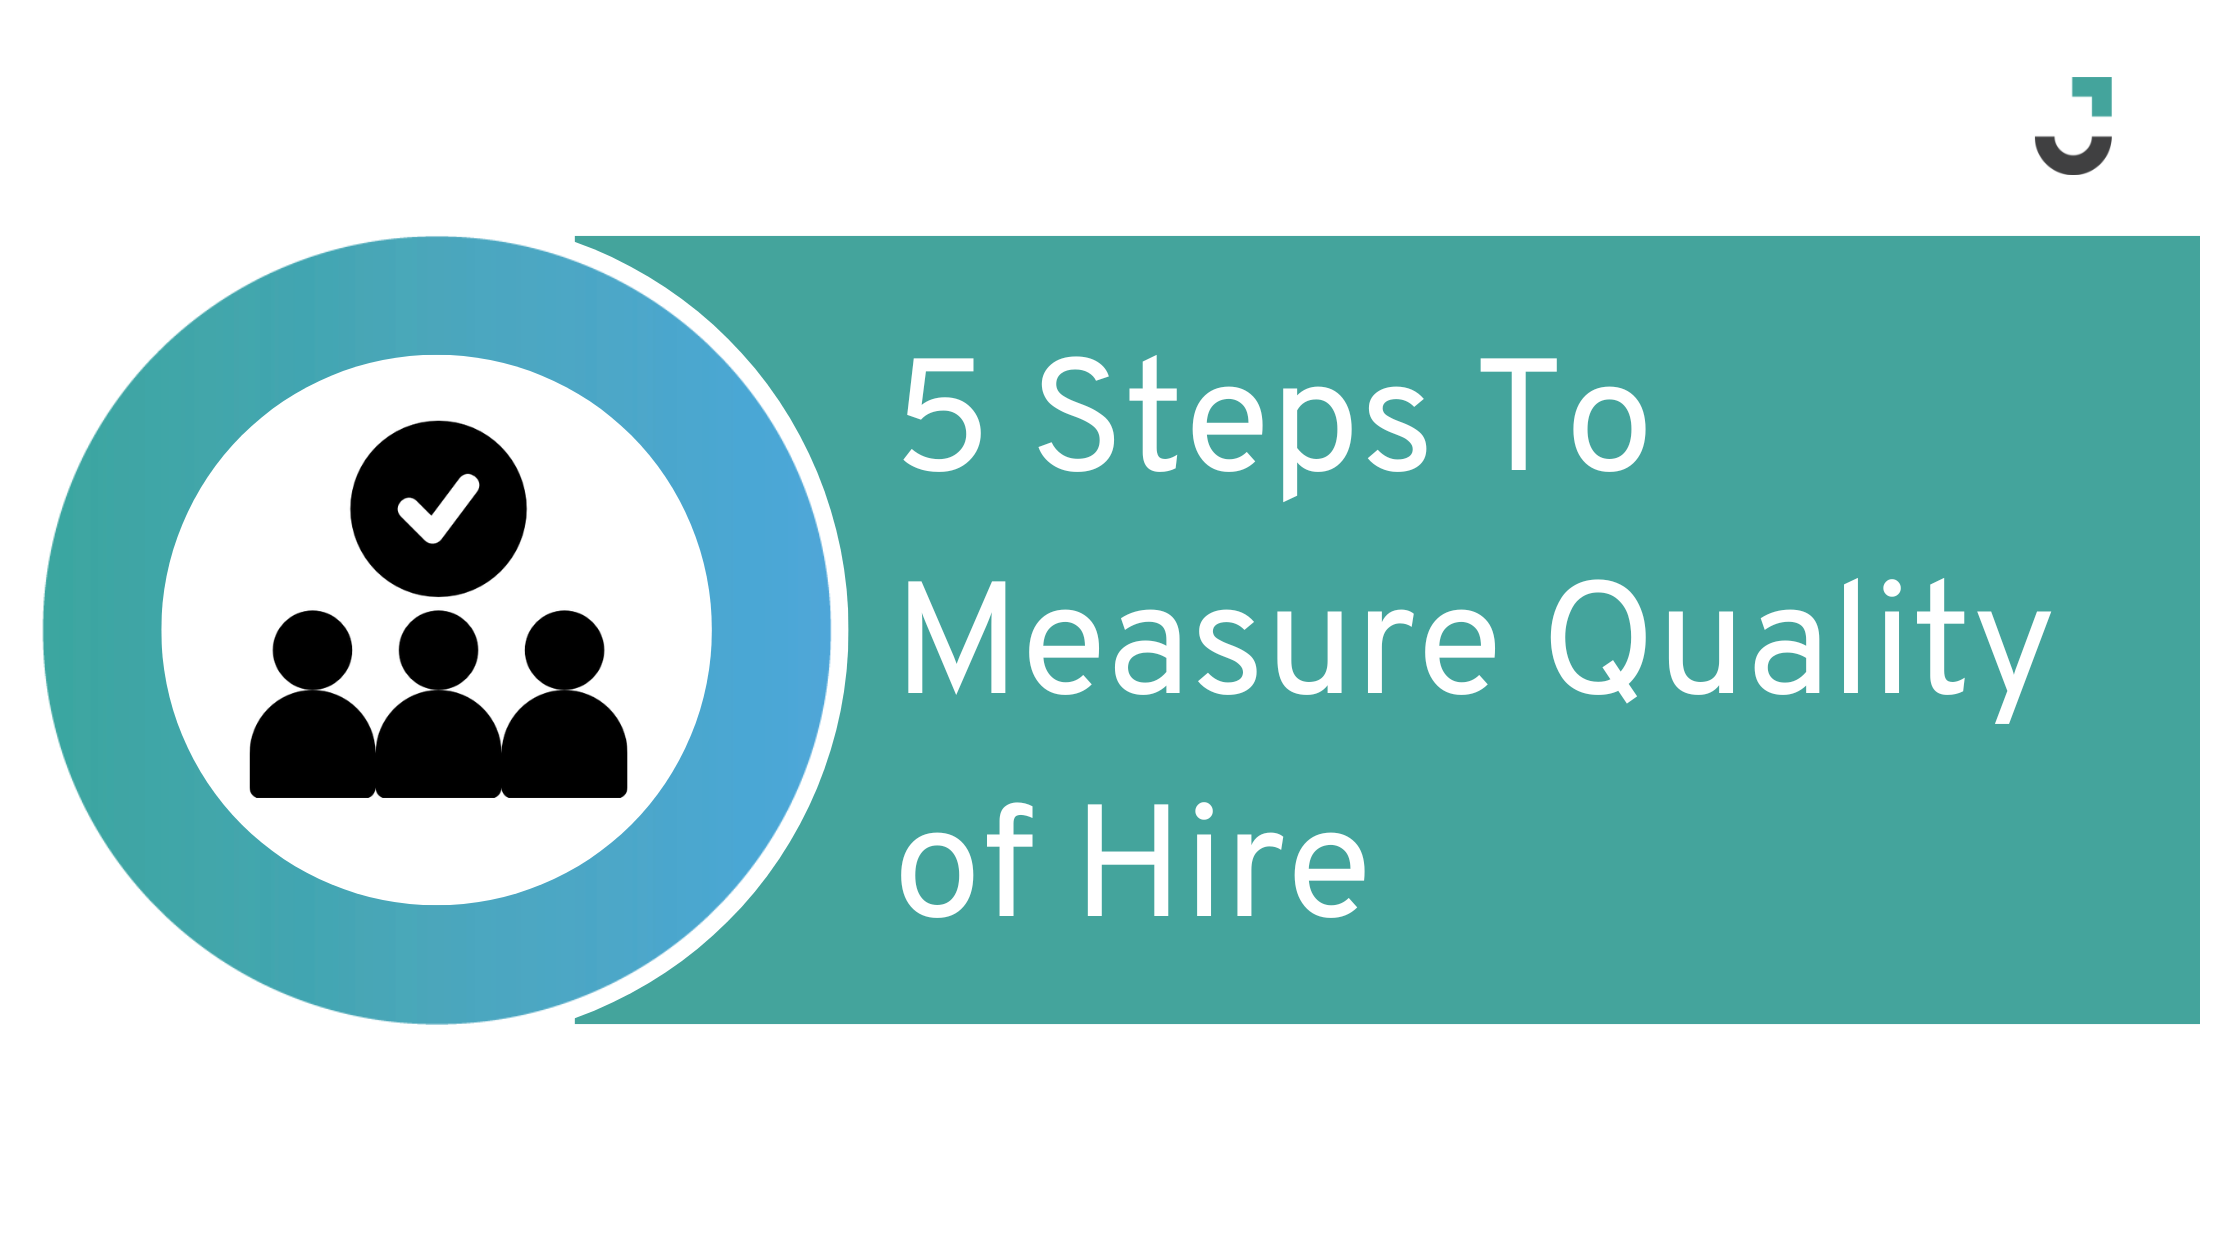 5 Steps To Measure Quality of Hire